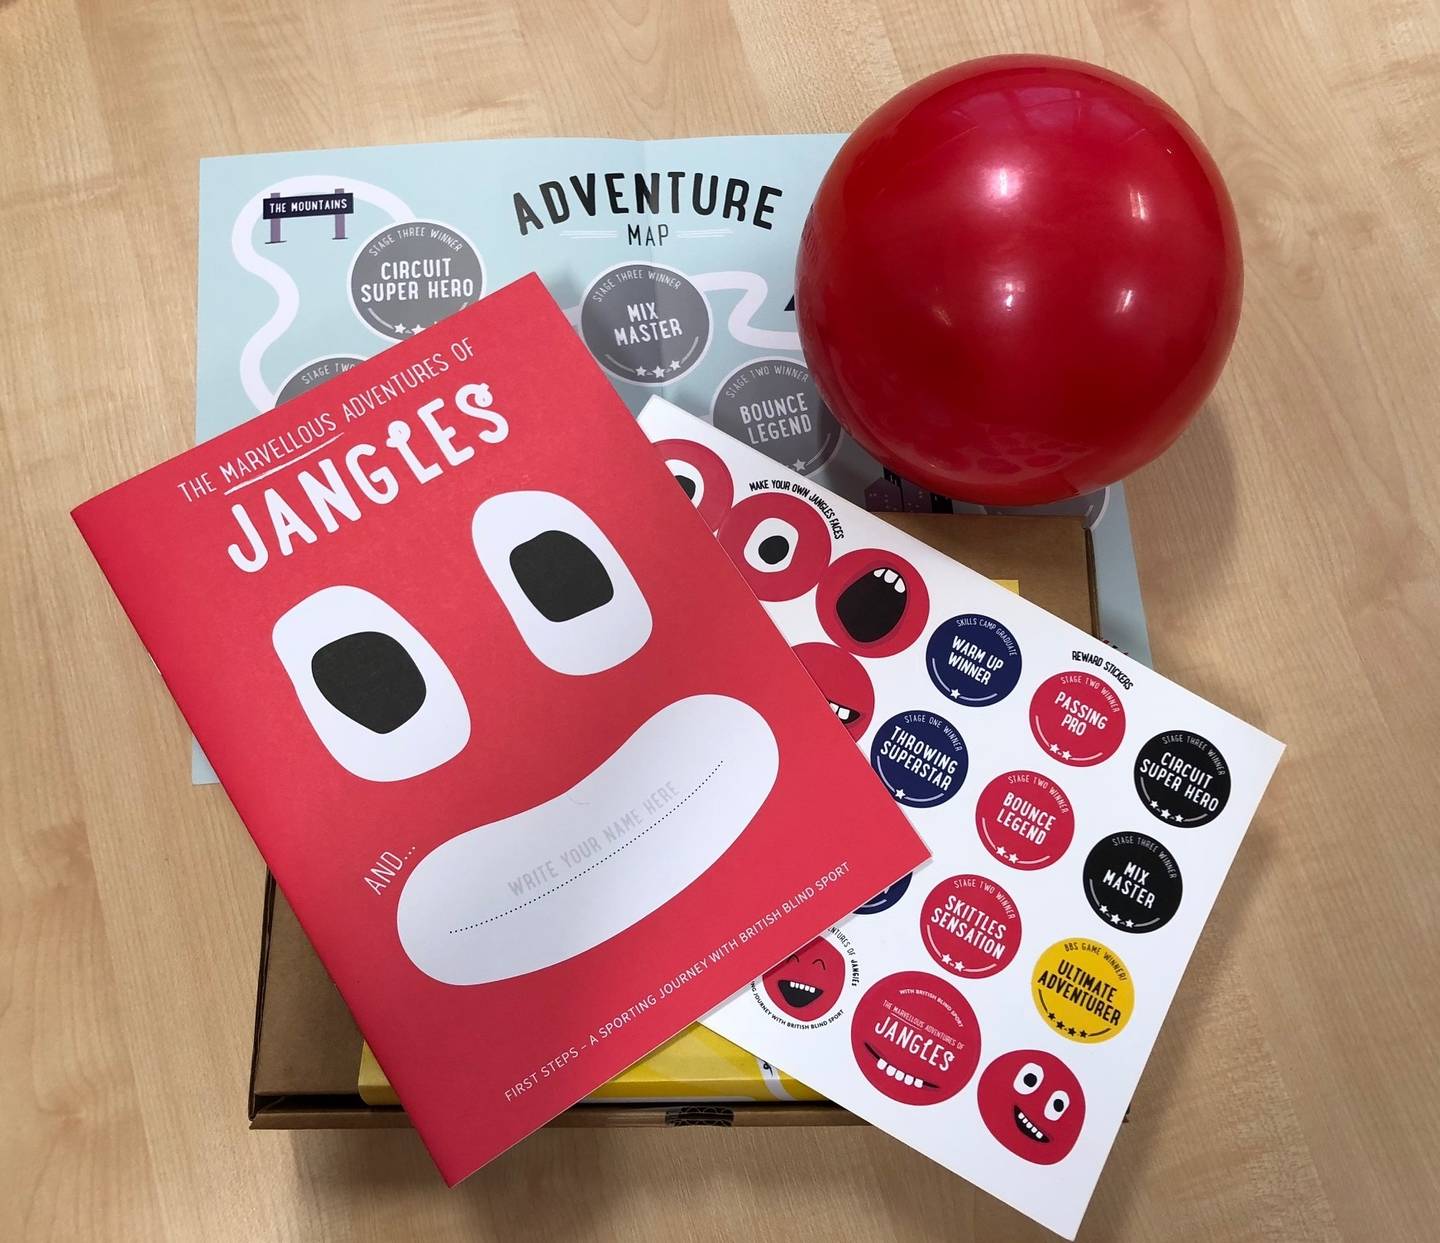 Photo shows contents of First Steps pack with jingle ball and activity book